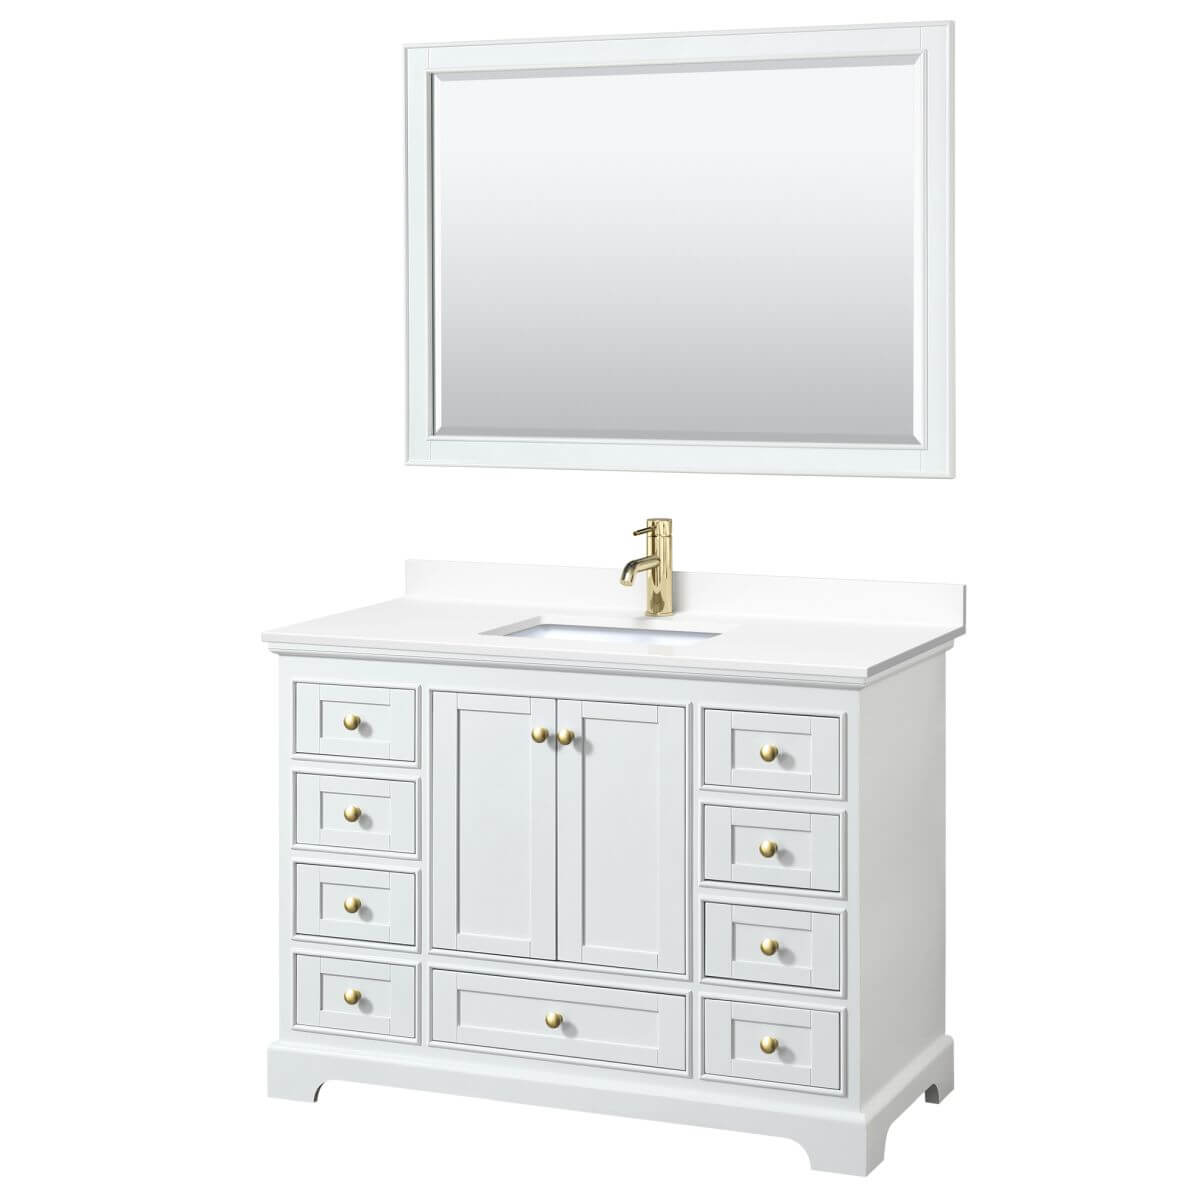 Wyndham Collection Deborah 48 inch Single Bathroom Vanity in White with White Cultured Marble Countertop, Undermount Square Sink, Brushed Gold Trim and 46 inch Mirror - WCS202048SWGWCUNSM46